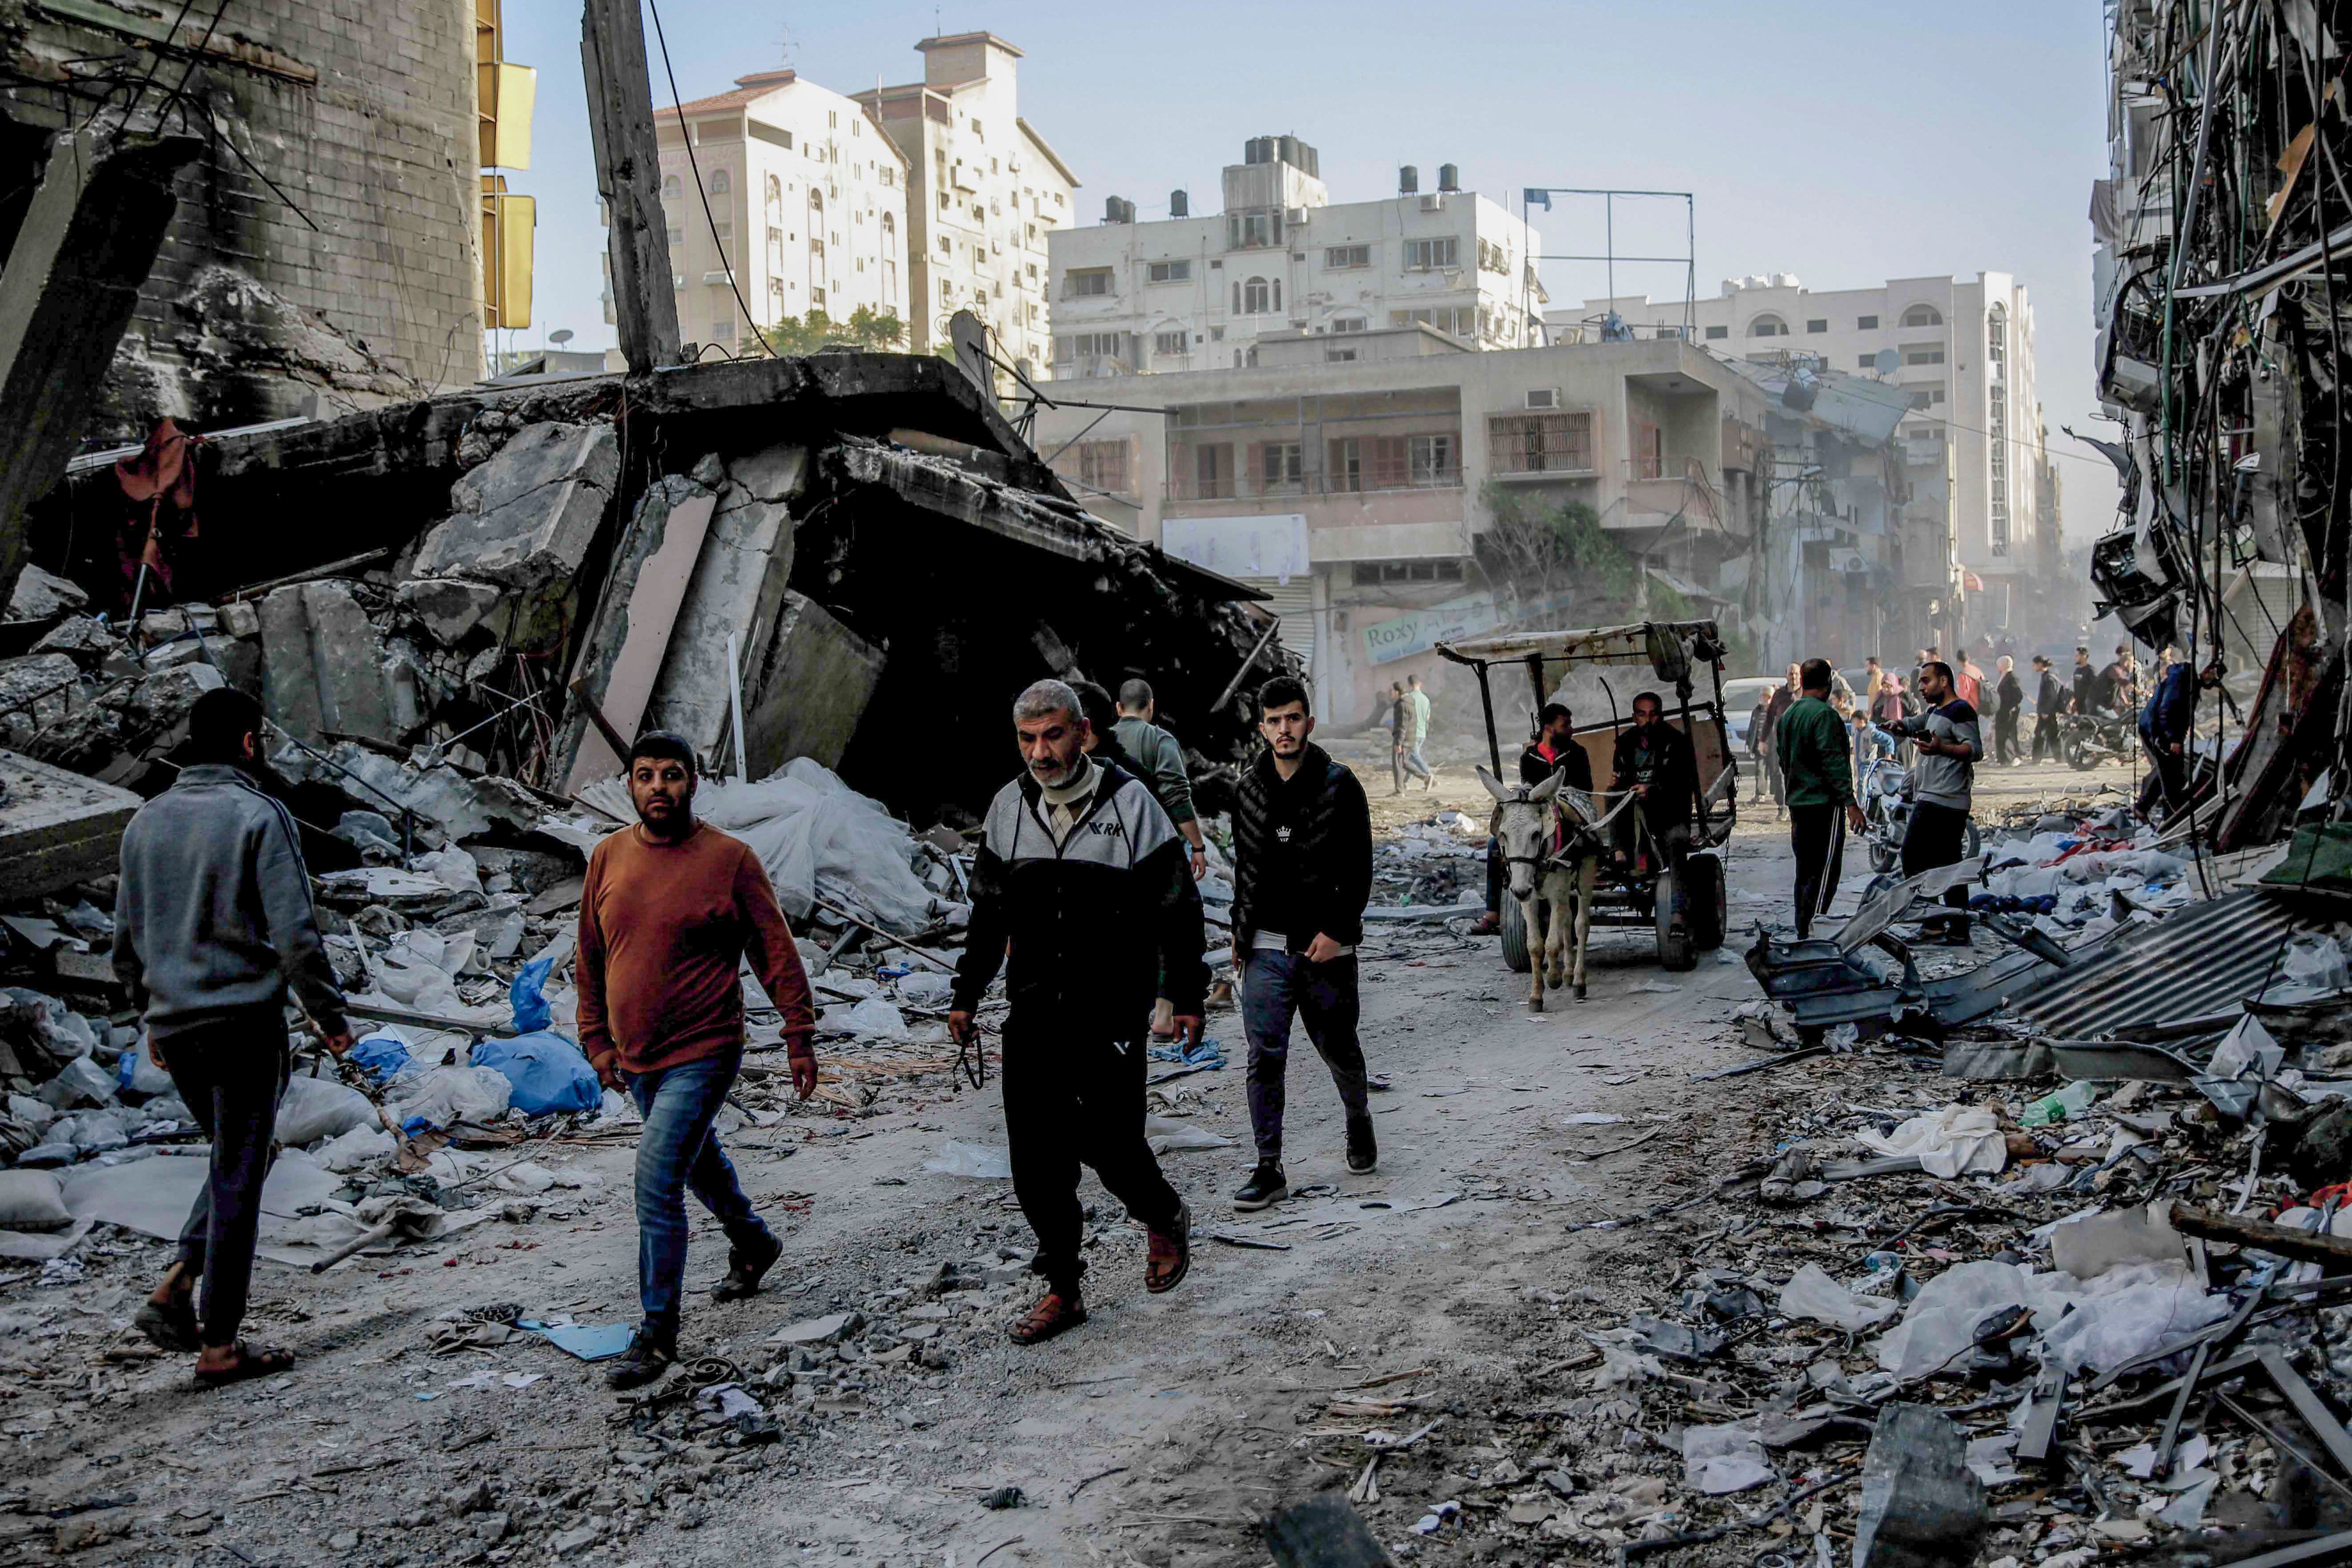 Palestinians walk amid the rubble of destroyed buildings in Gaza City on Friday